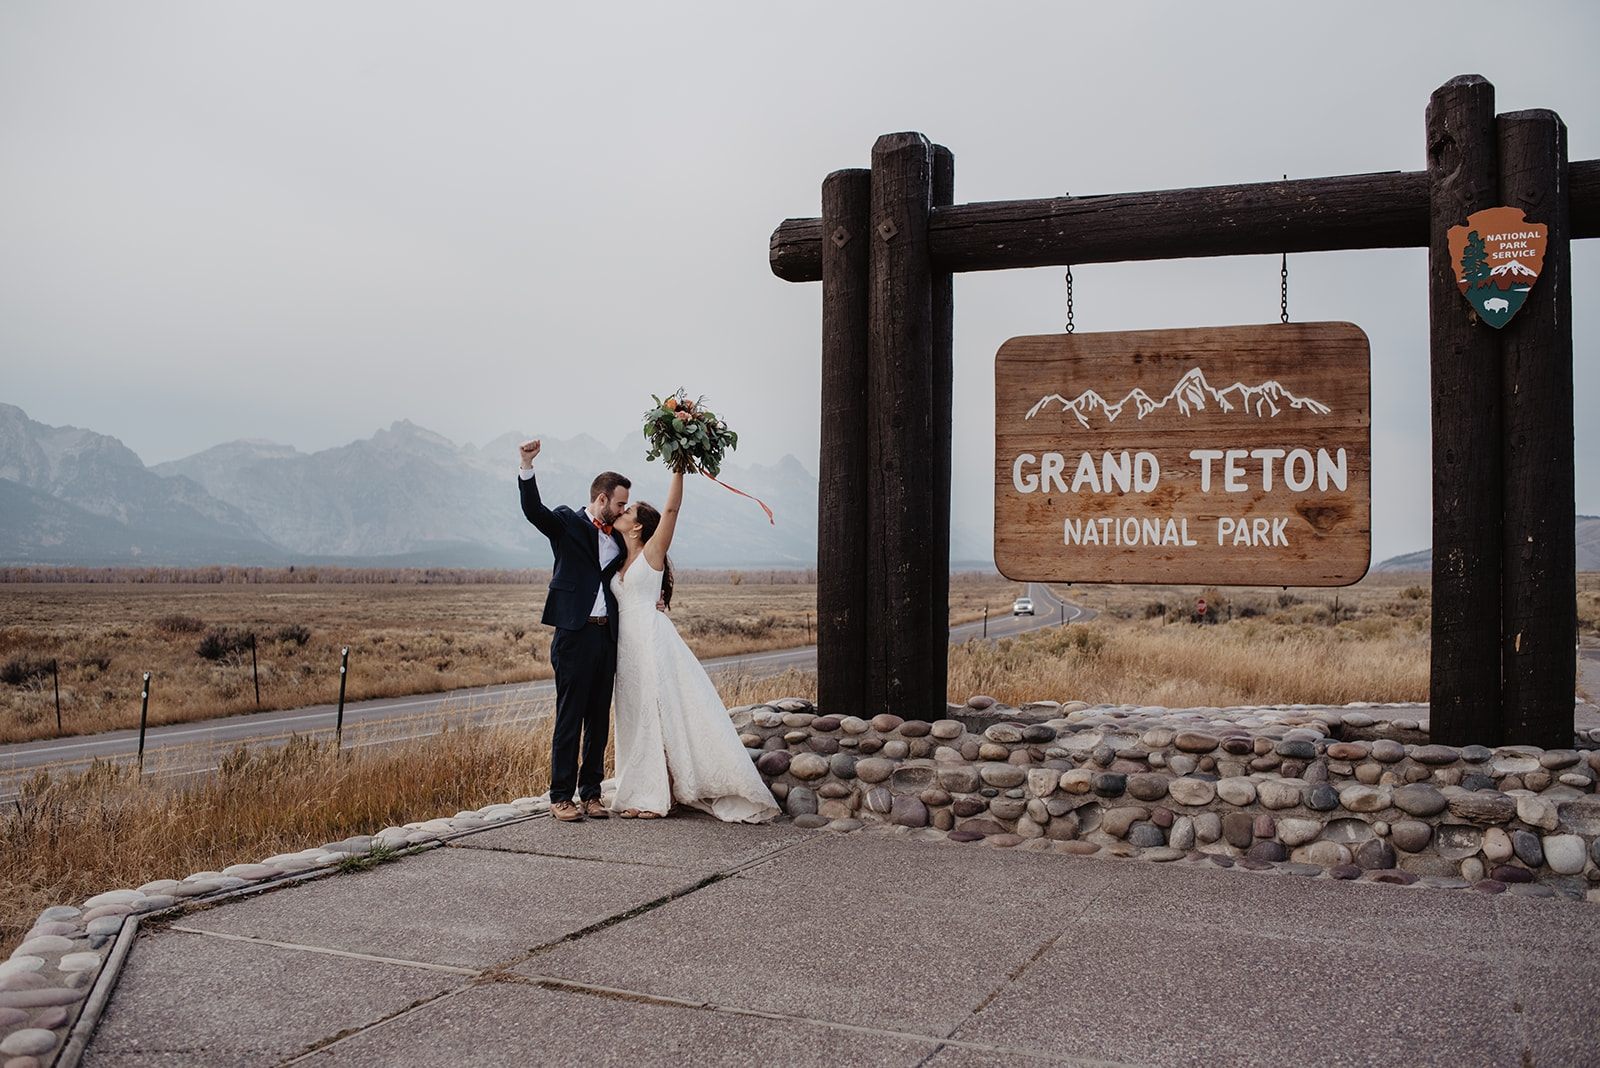 Bride and groom standing next to the Grand Teton National Park sign with their arms in the arm in celebration